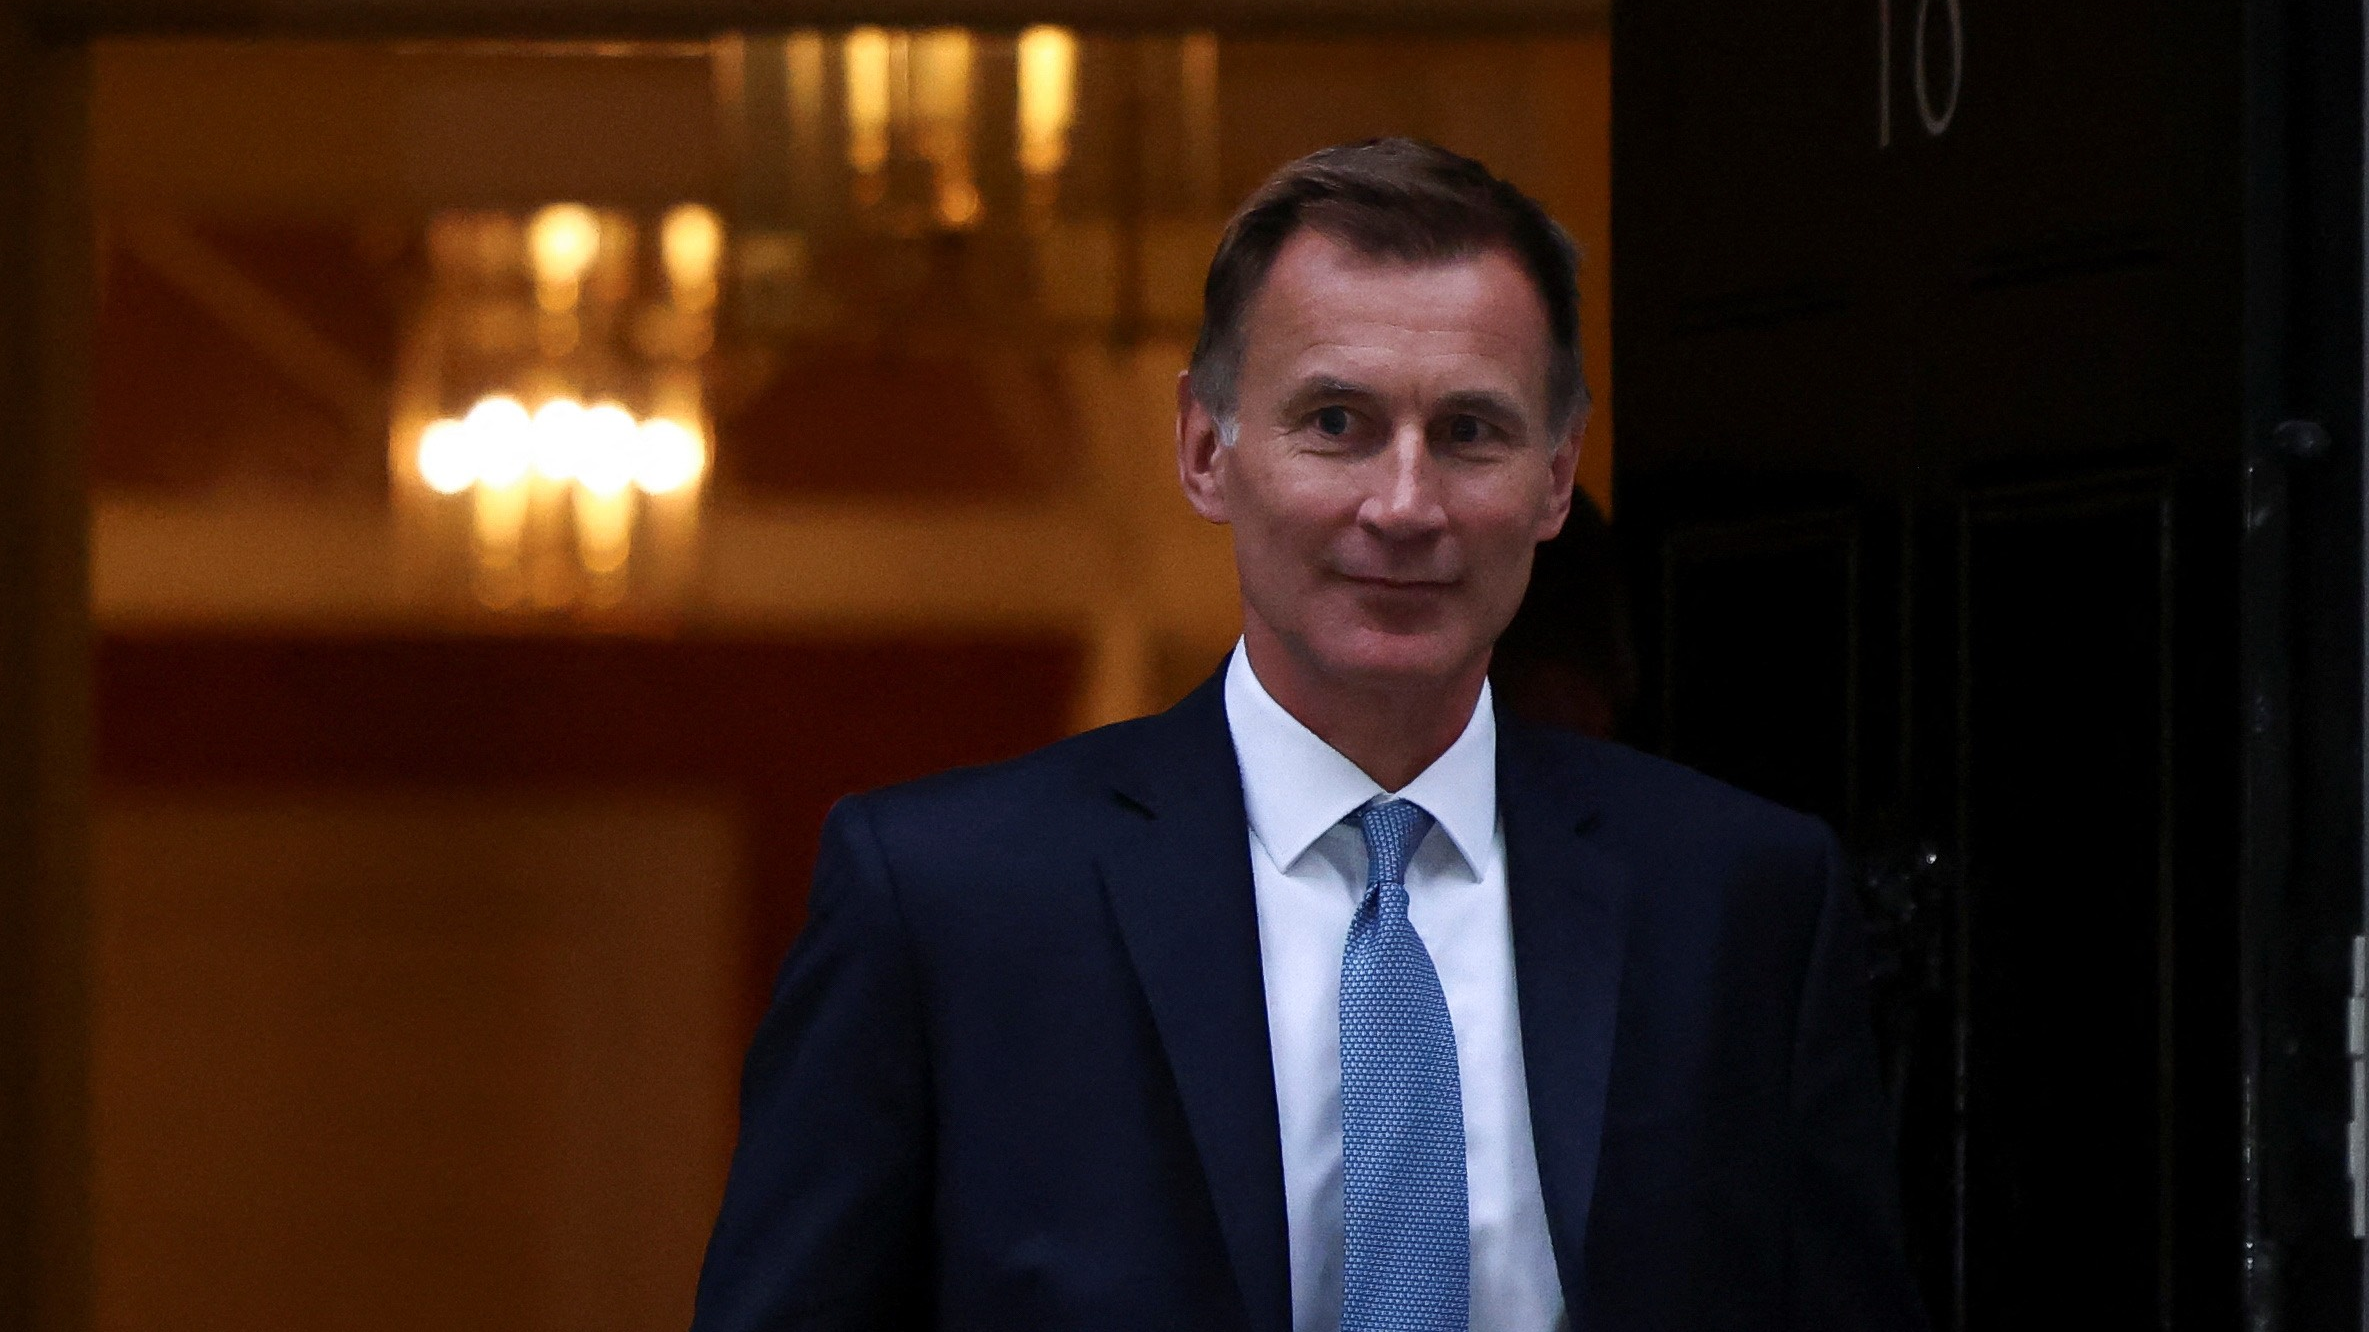 UK's new Chancellor of the Exchequer Jeremy Hunt leaves 10 Downing Street in London. /Henry Nicholls/Reuters